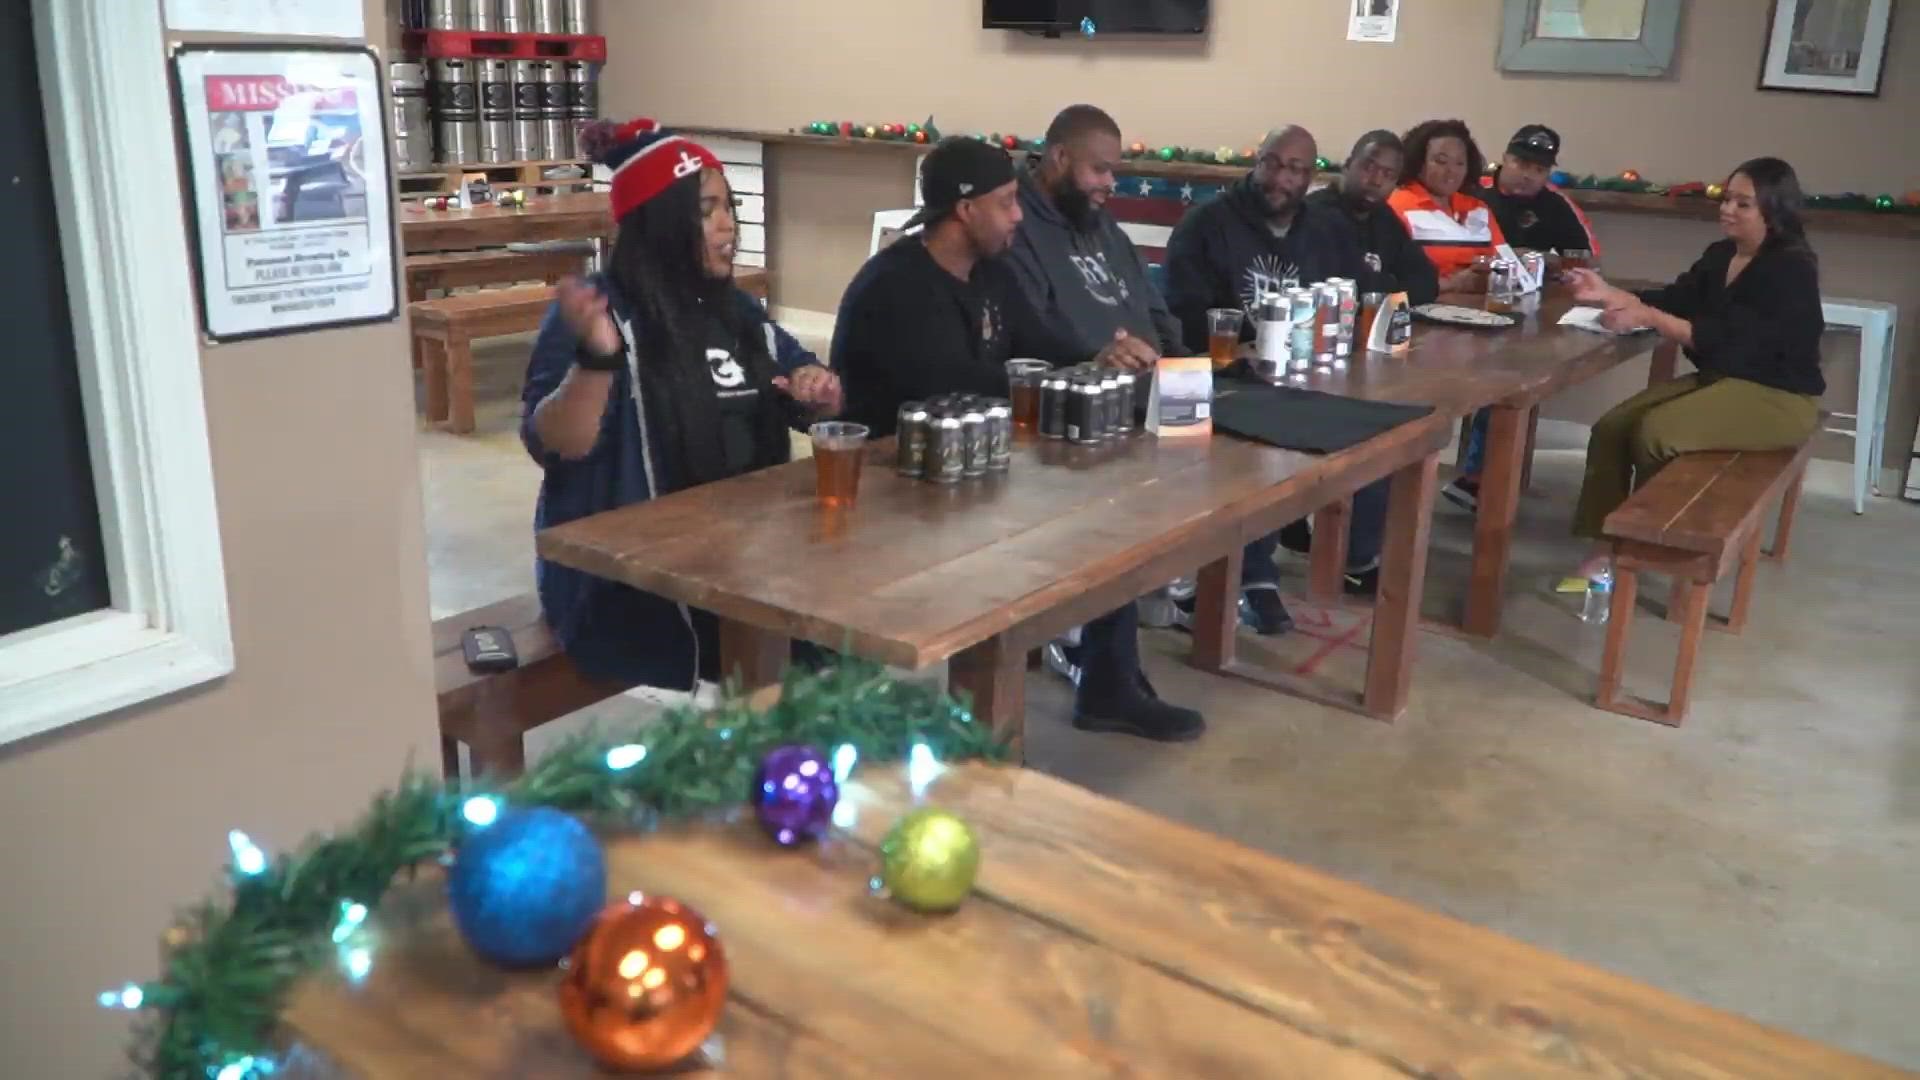 There are nearly 9,000 craft breweries in the United States, but less than 1% are Black-owned. These local Black beer brands are working to change that.